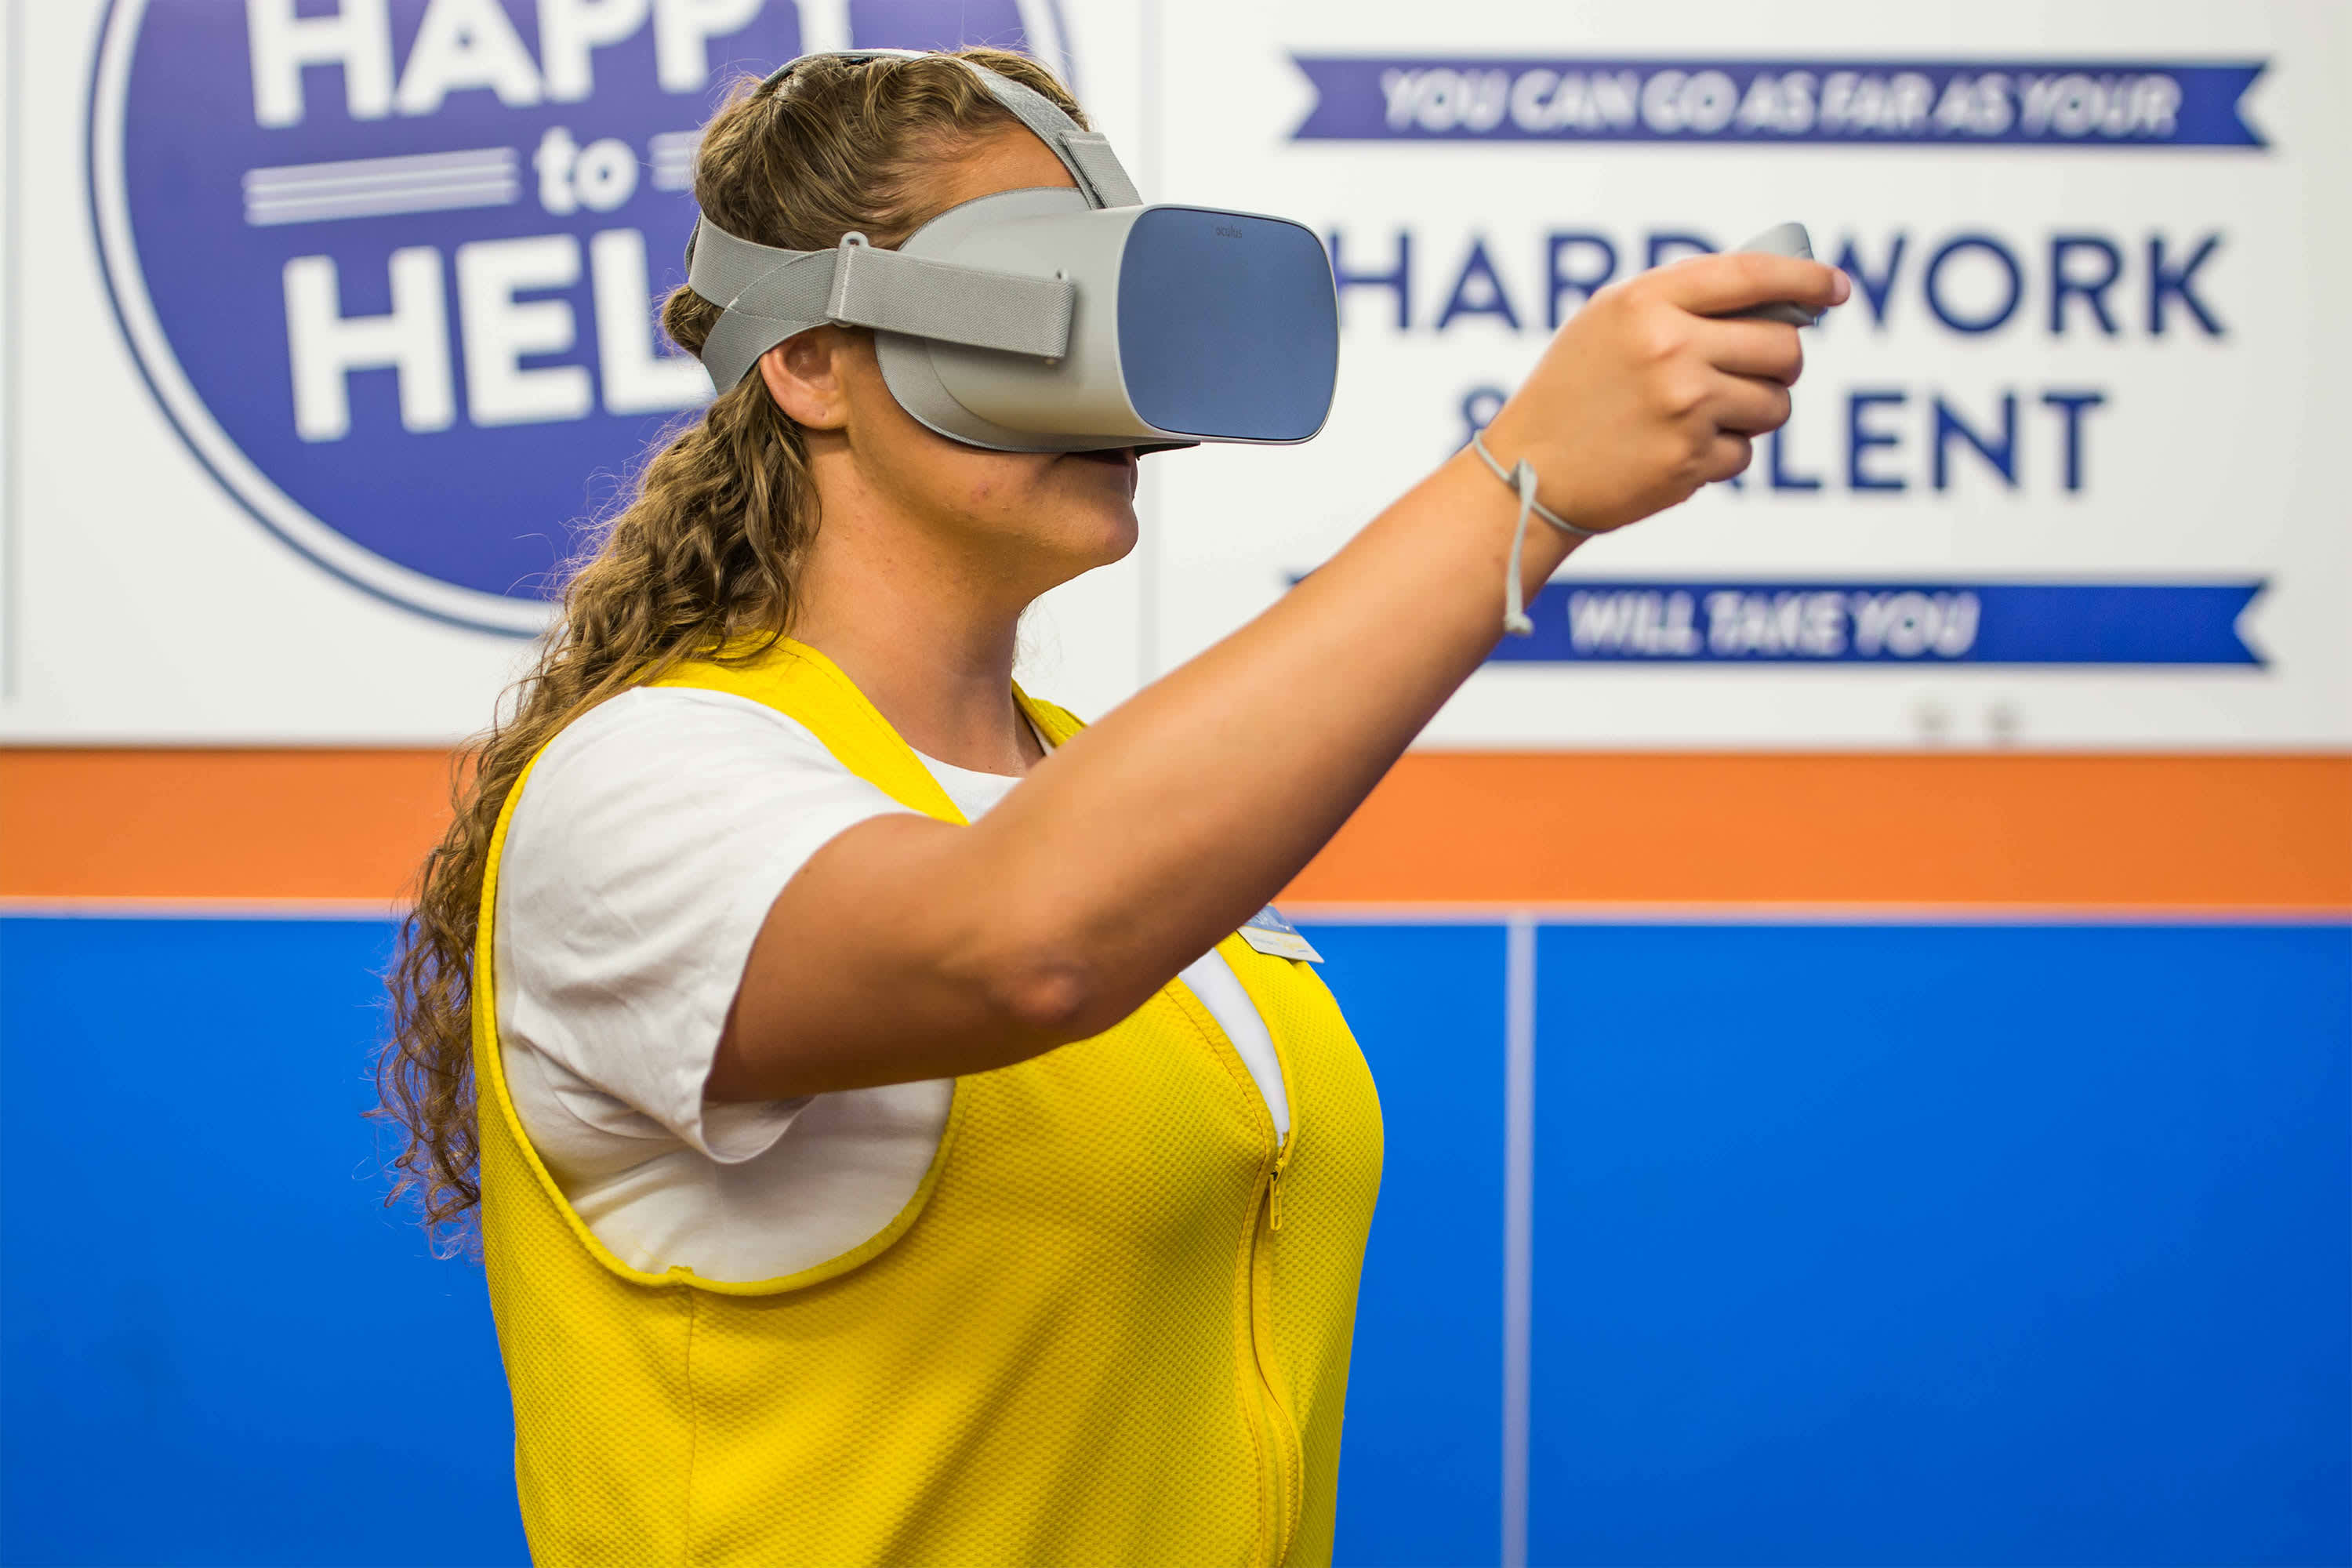 Is VR the Future of Corporate Training?